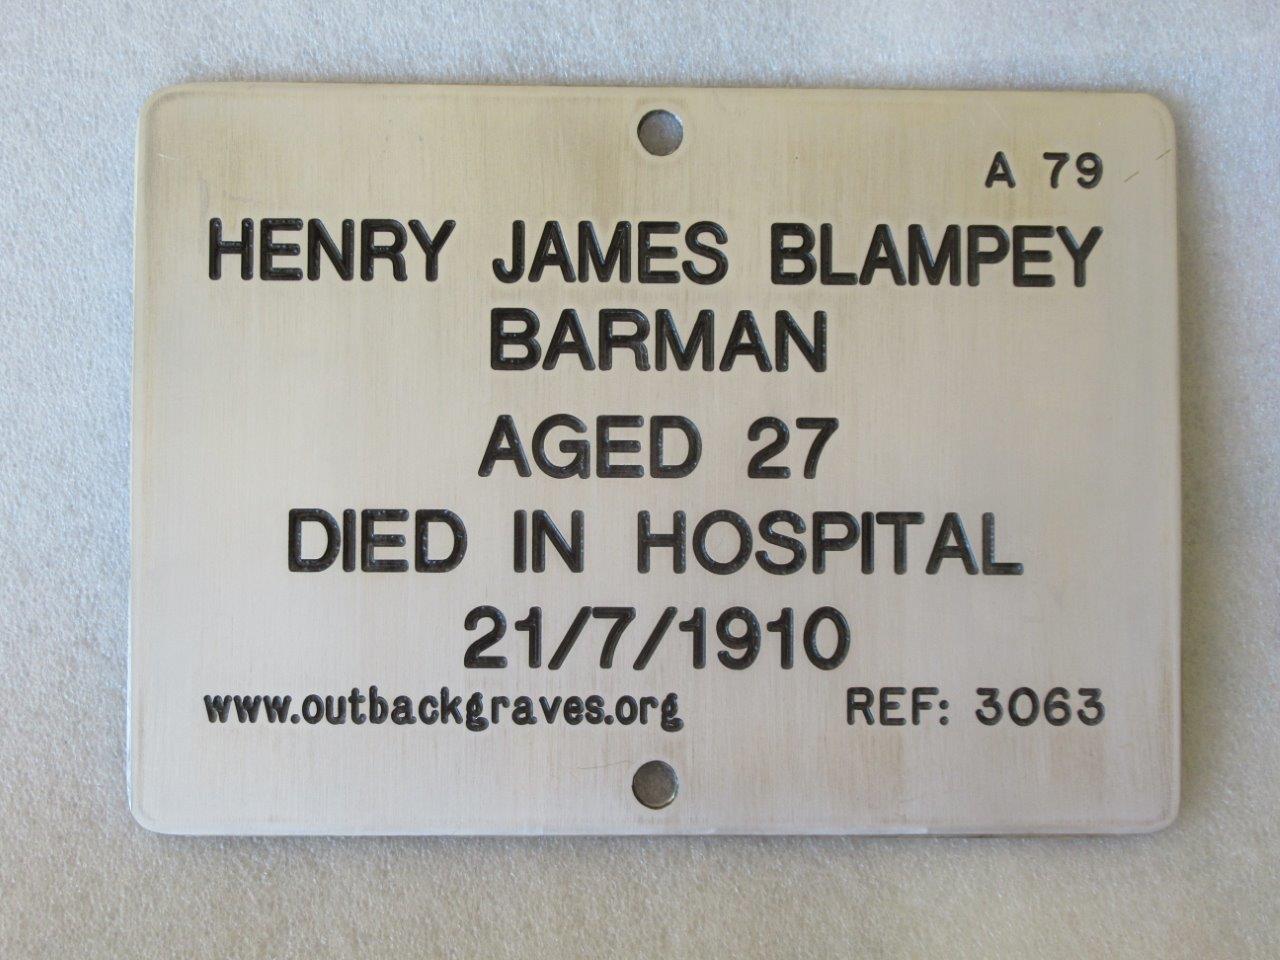 This is a photograph of plaque number 3063 for HENRY JAMES BLAMPEY at Mt MORGANS